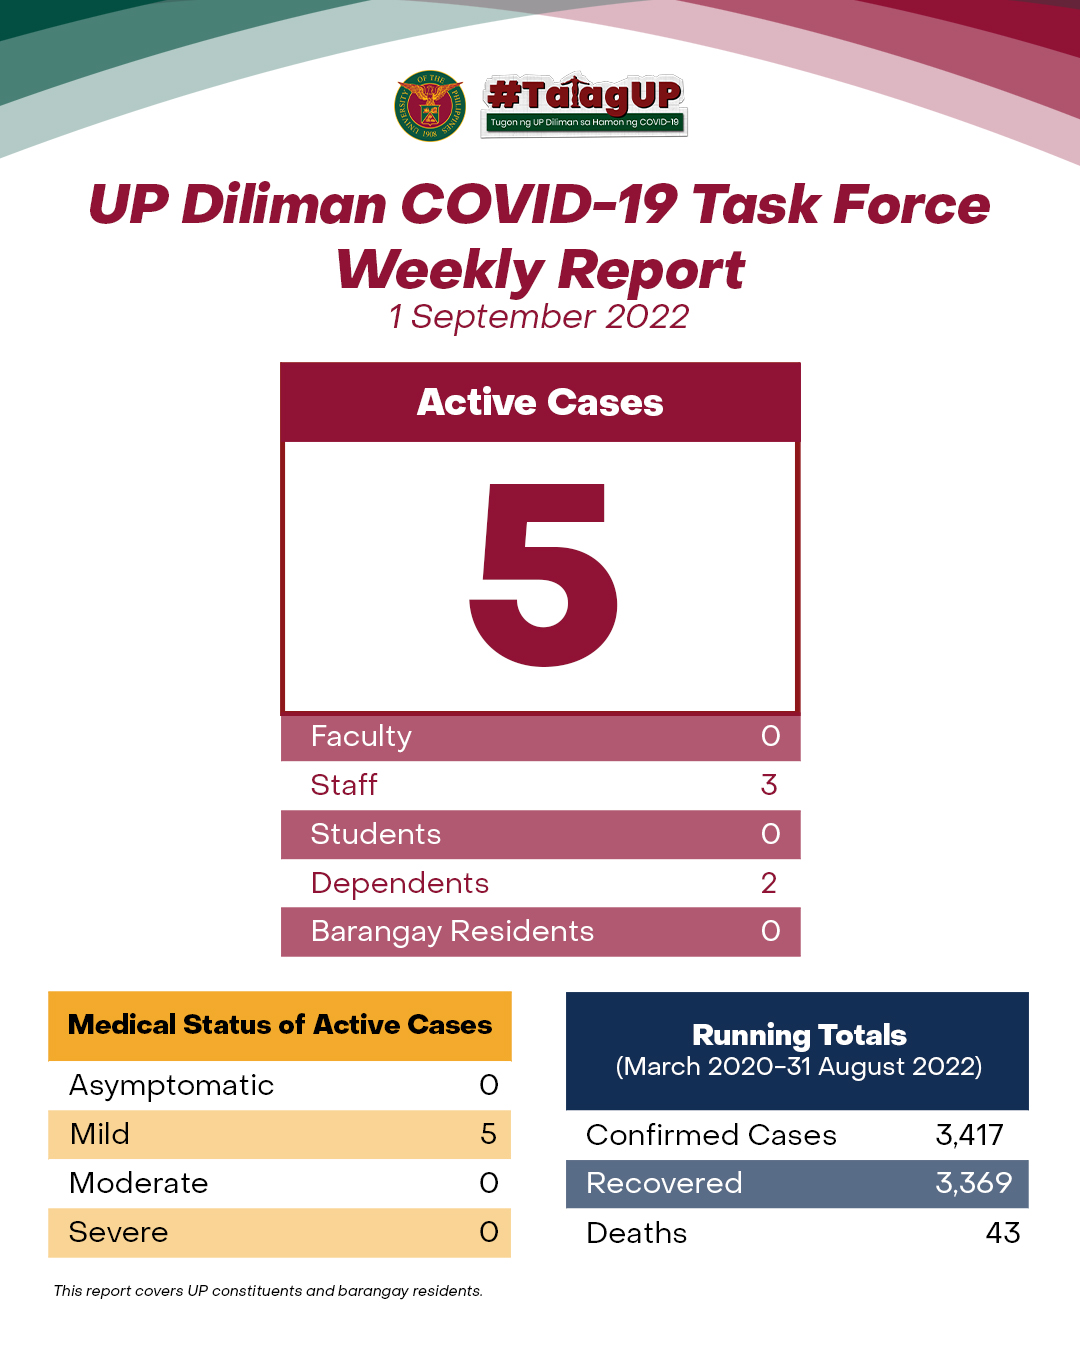 UP Diliman COVID-19 Task Force Weekly Report (1 September 2022)